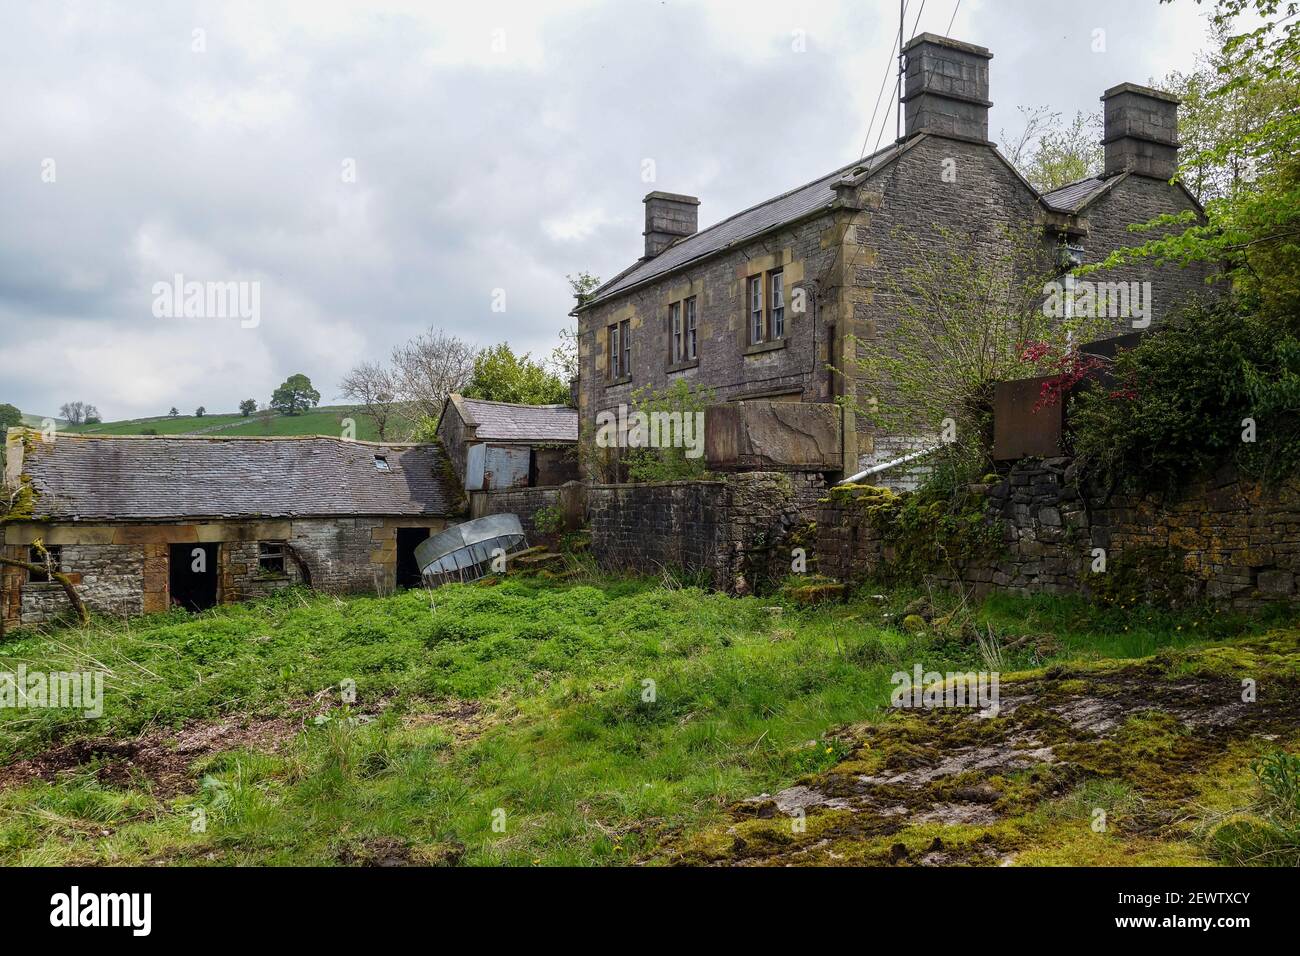 Old derelict farm buildings at Narrowdale, Staffordshire, England, UK Stock Photo